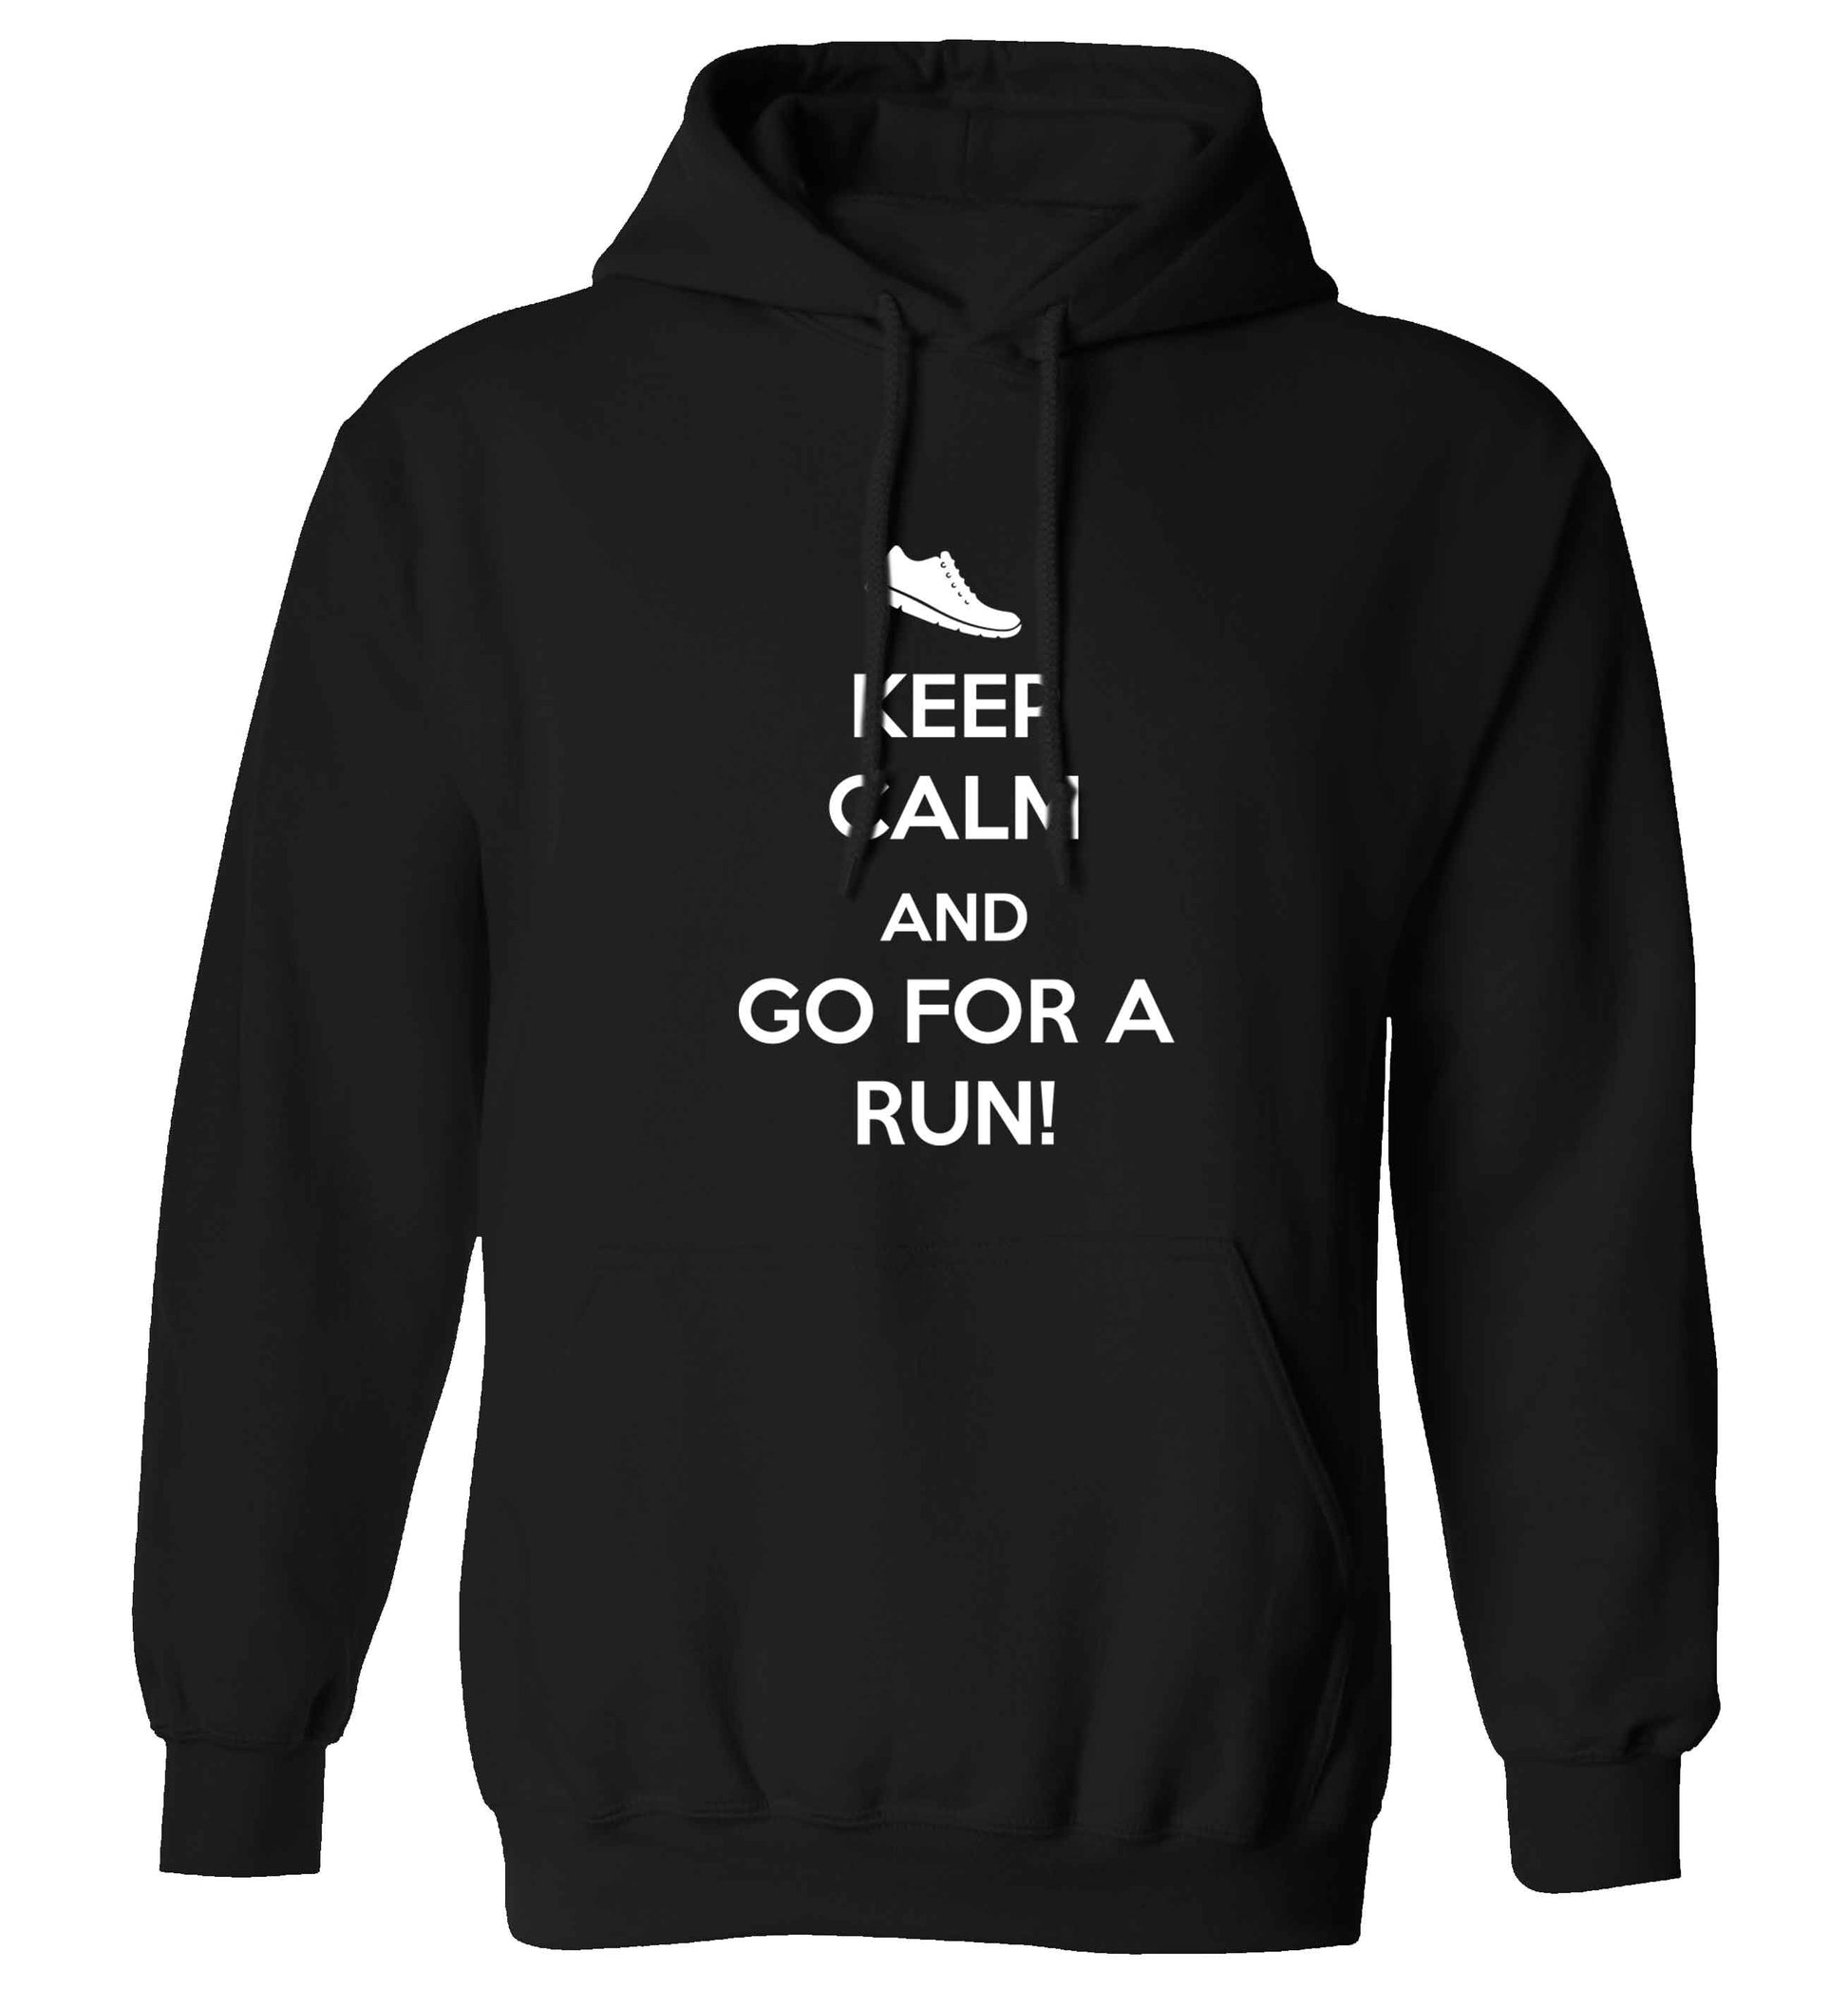 Keep calm and go for a run adults unisex black hoodie 2XL